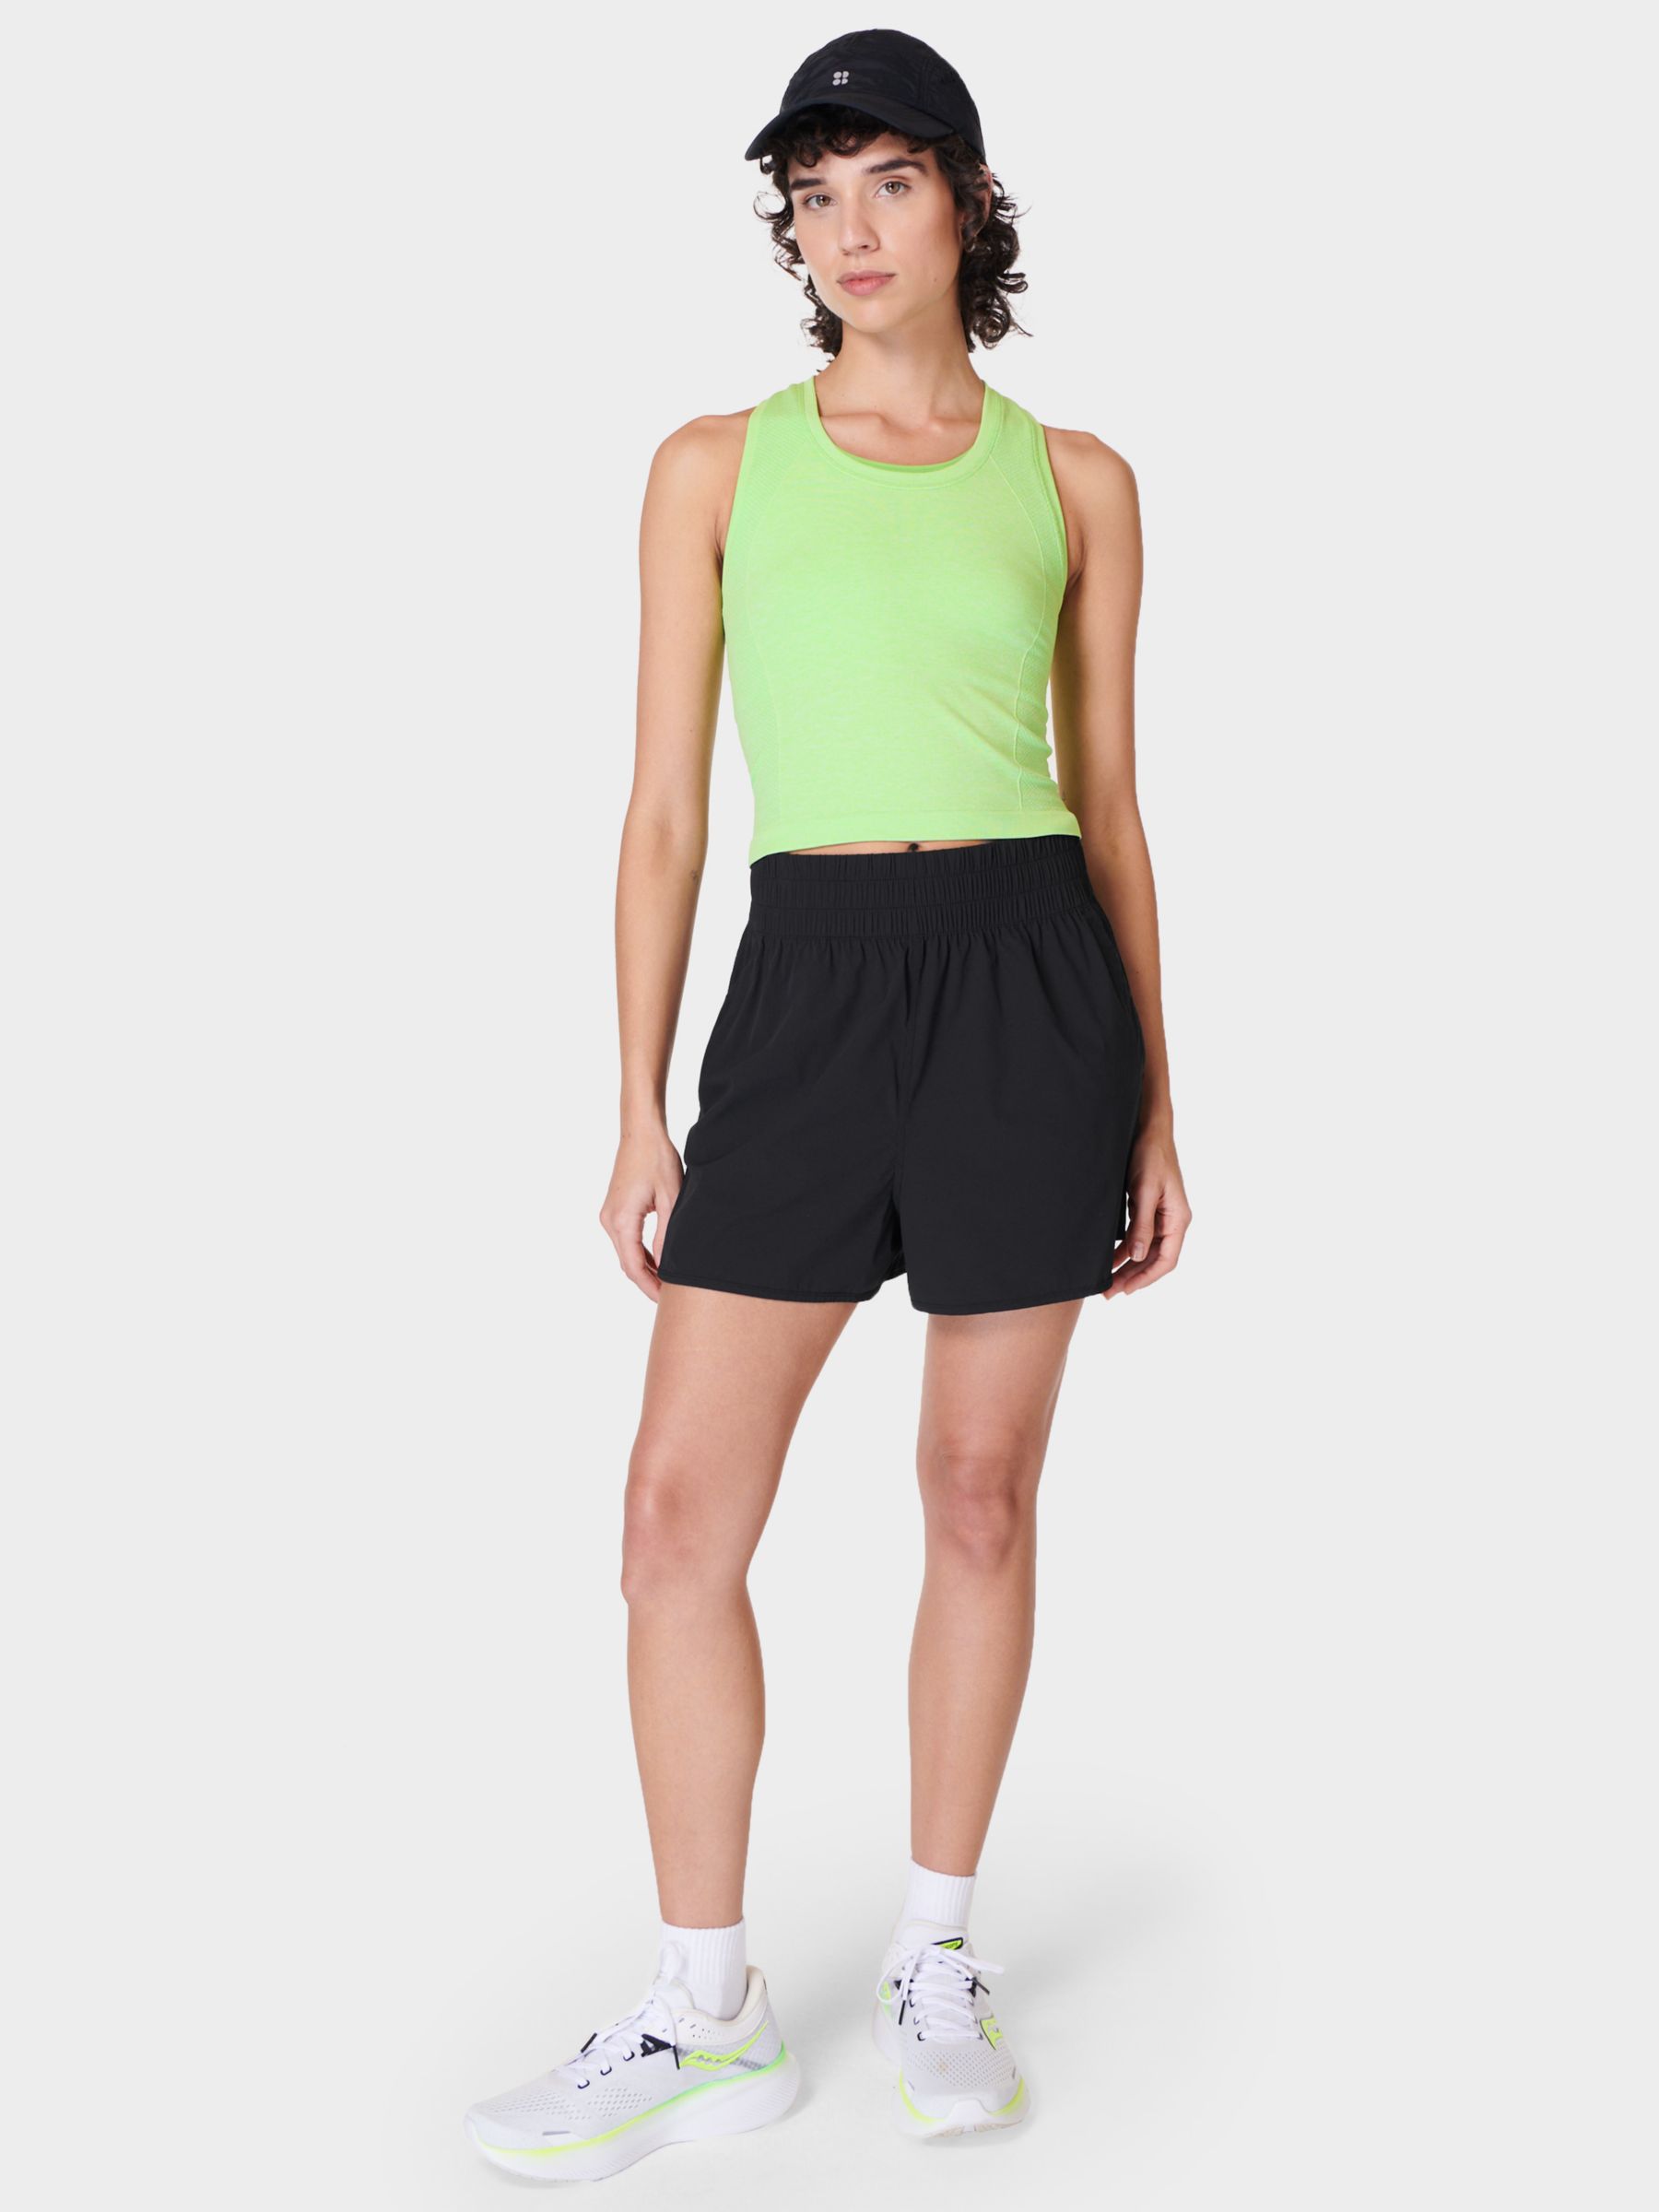 Buy Sweaty Betty Relay Unlined Shell Shorts, Black Online at johnlewis.com